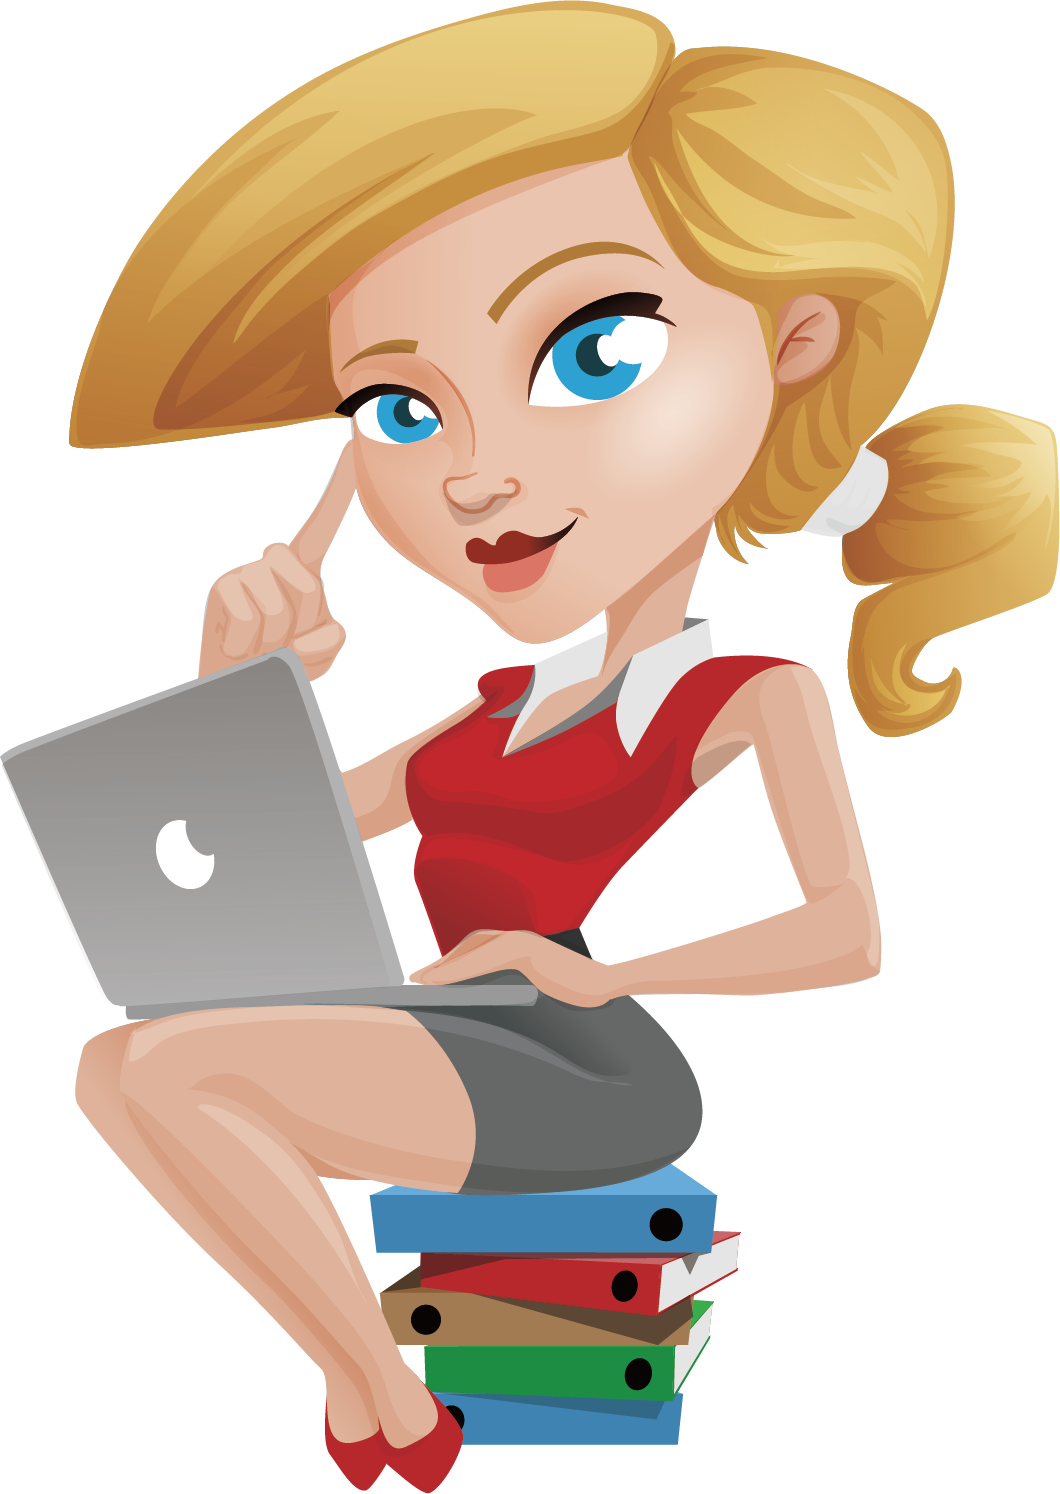 Laptop Woman Illustration - Vector Business Girl With Laptop (1060x1494)